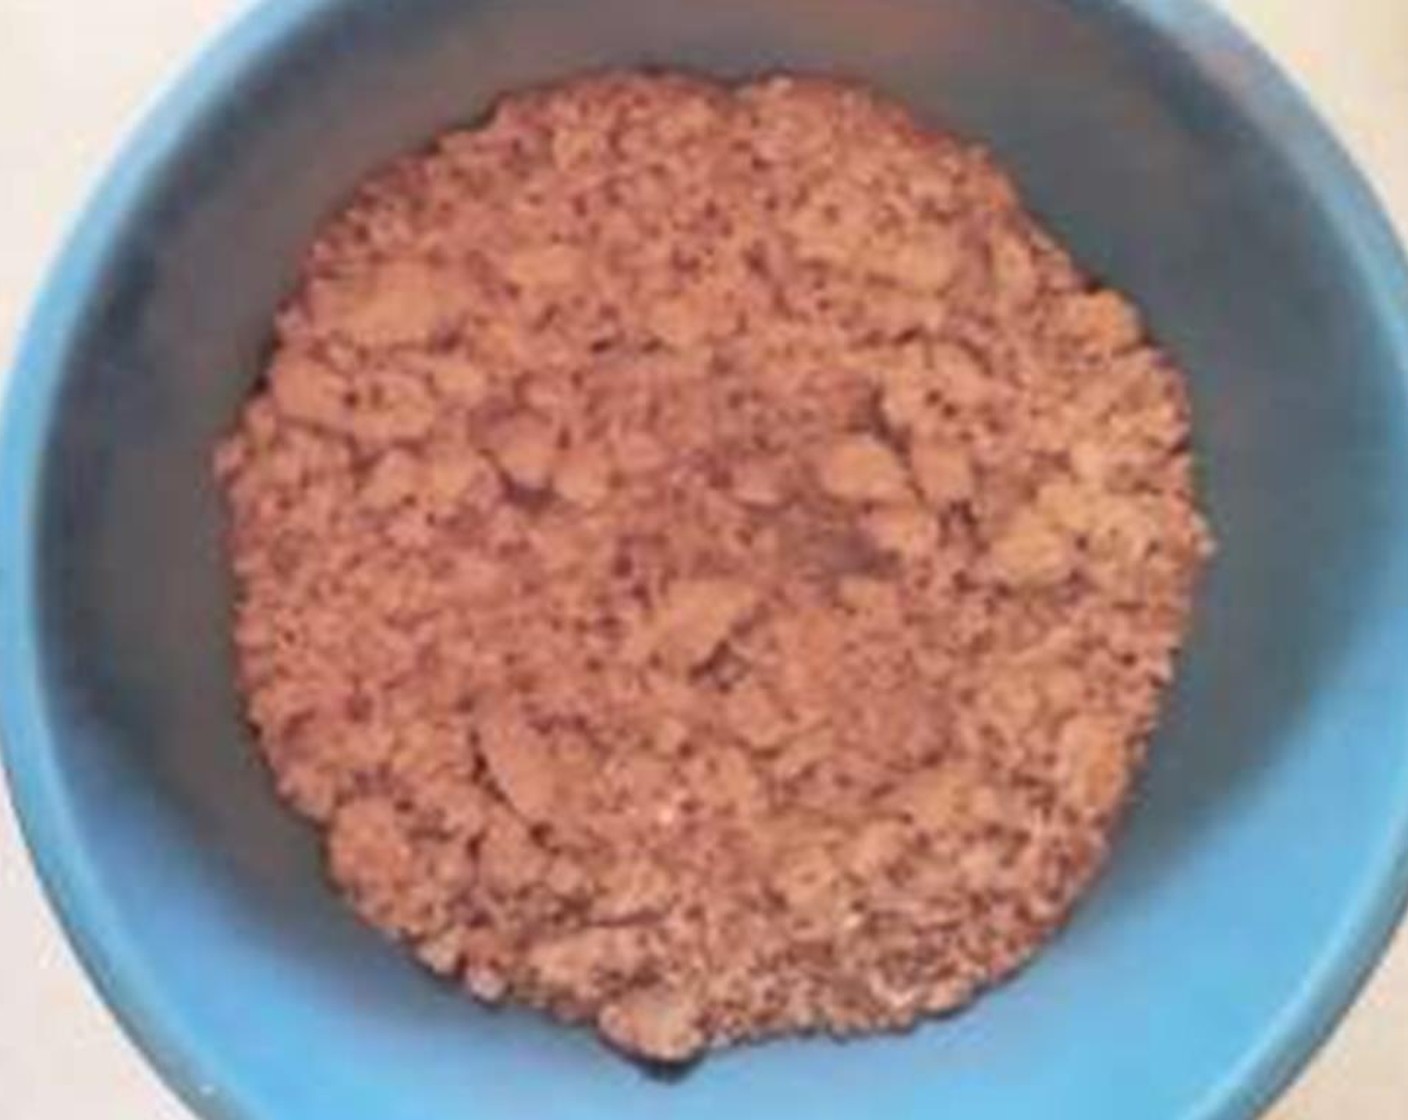 step 2 Next, mix the Brown Sugar (1/3 cup) and Ground Cinnamon (1 tsp) together to get the topping.